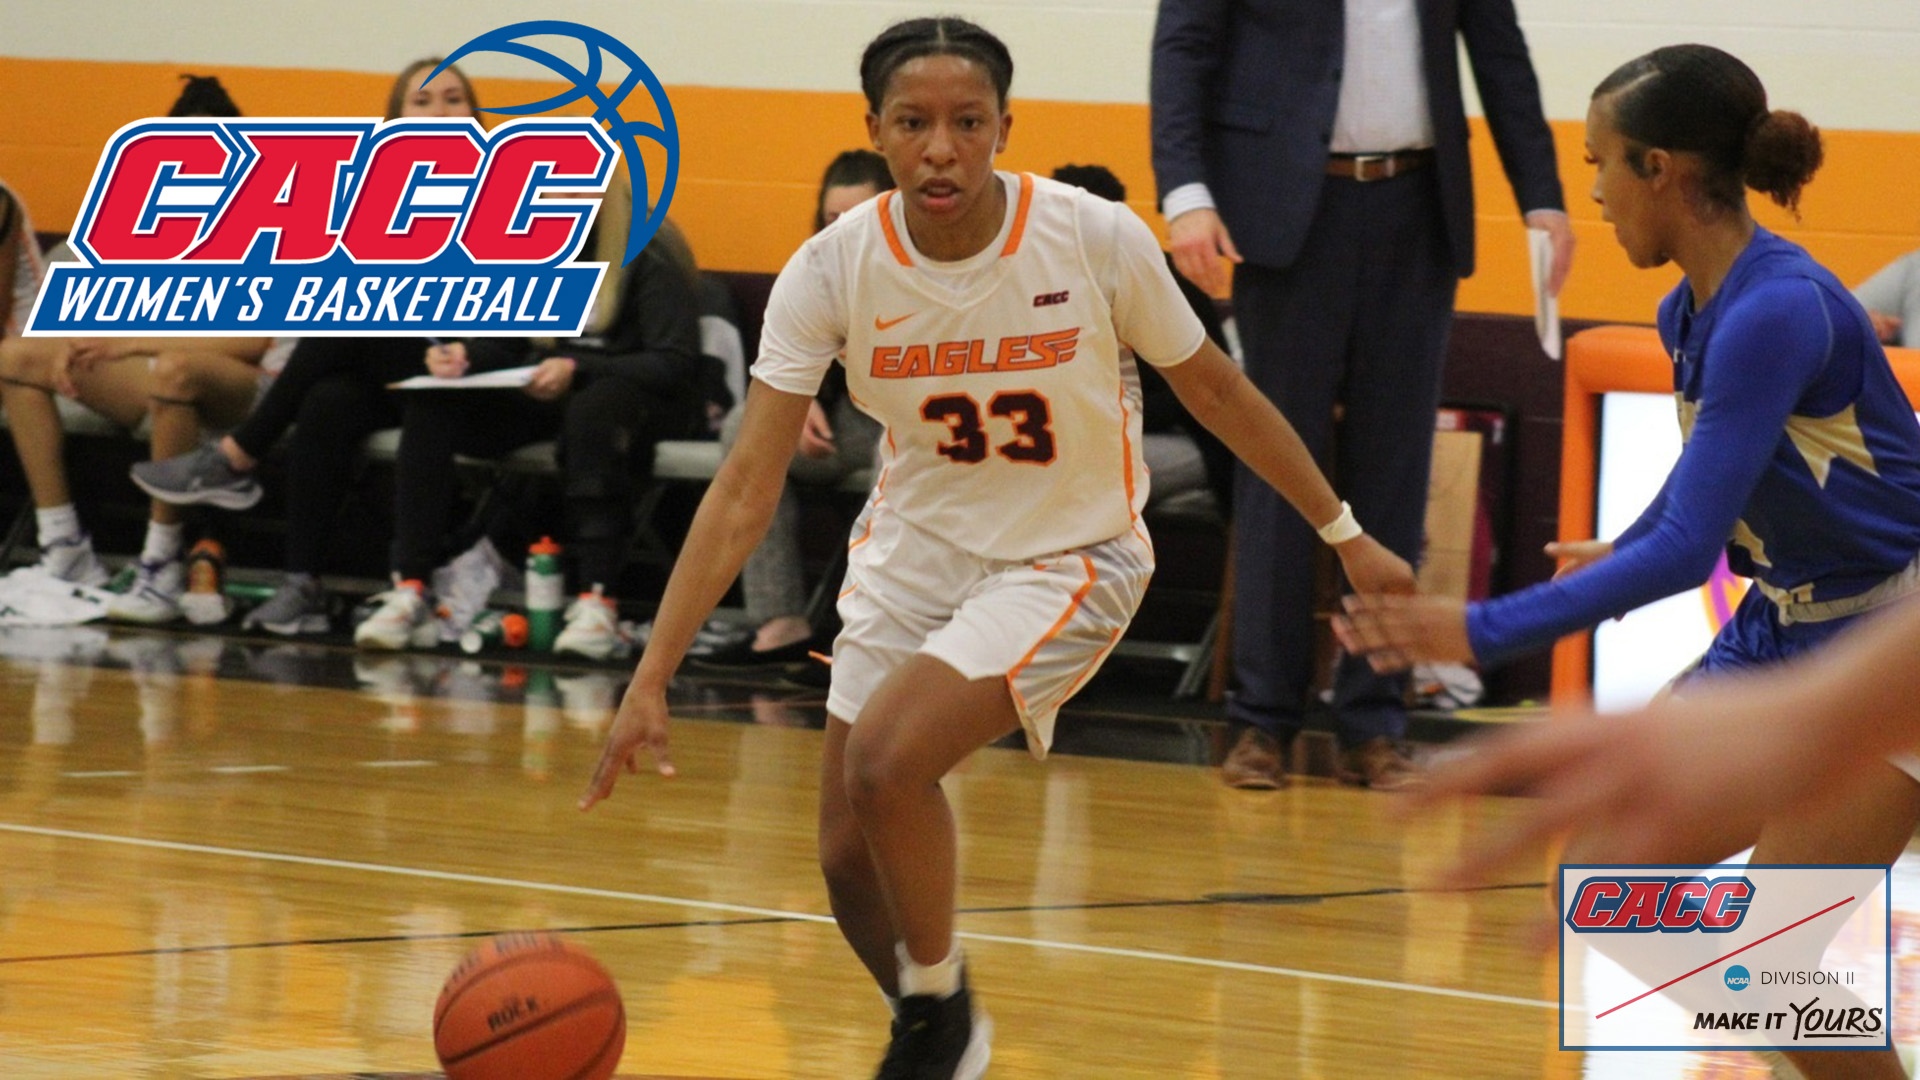 CACC Women's Basketball Weekly Honorees (1-23-23)